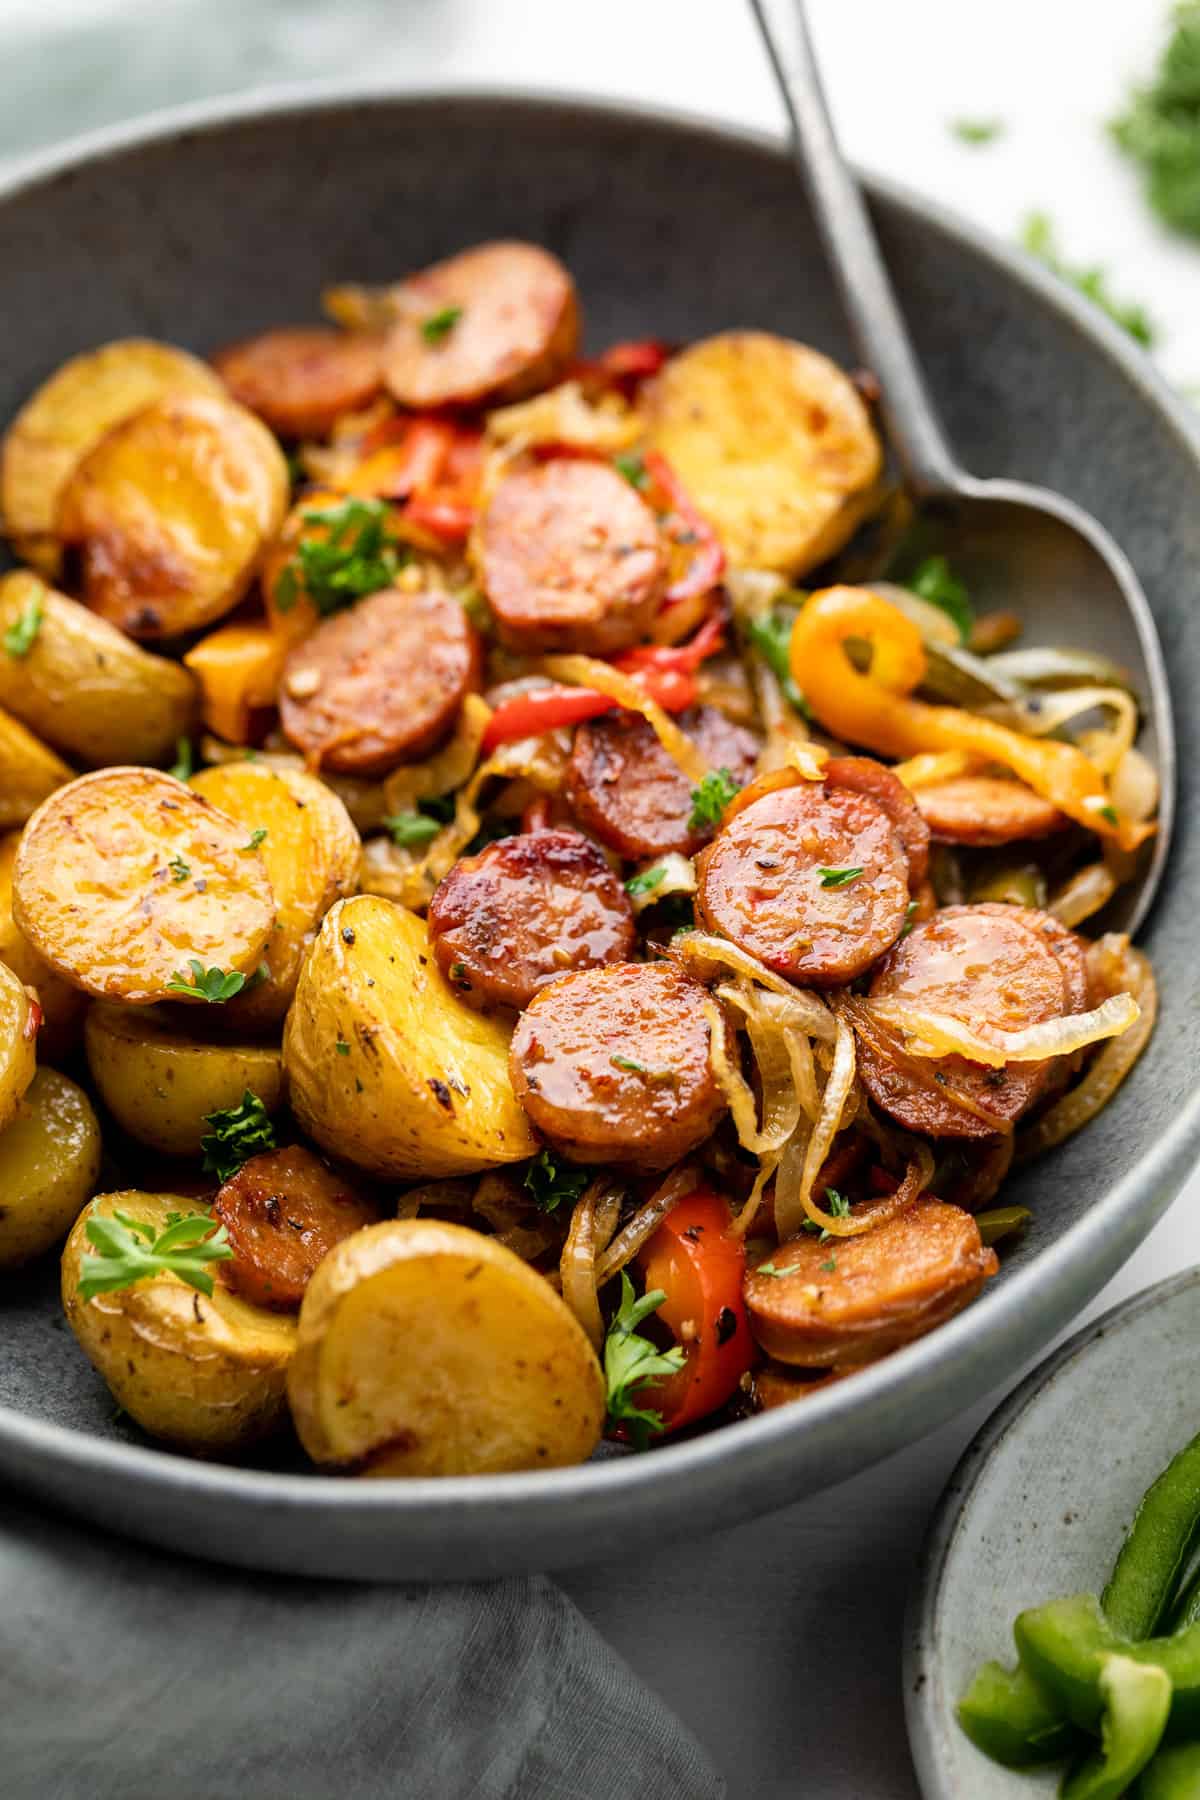 https://www.erinliveswhole.com/wp-content/uploads/2023/03/sheet-pan-sausage-and-peppers-9.jpg